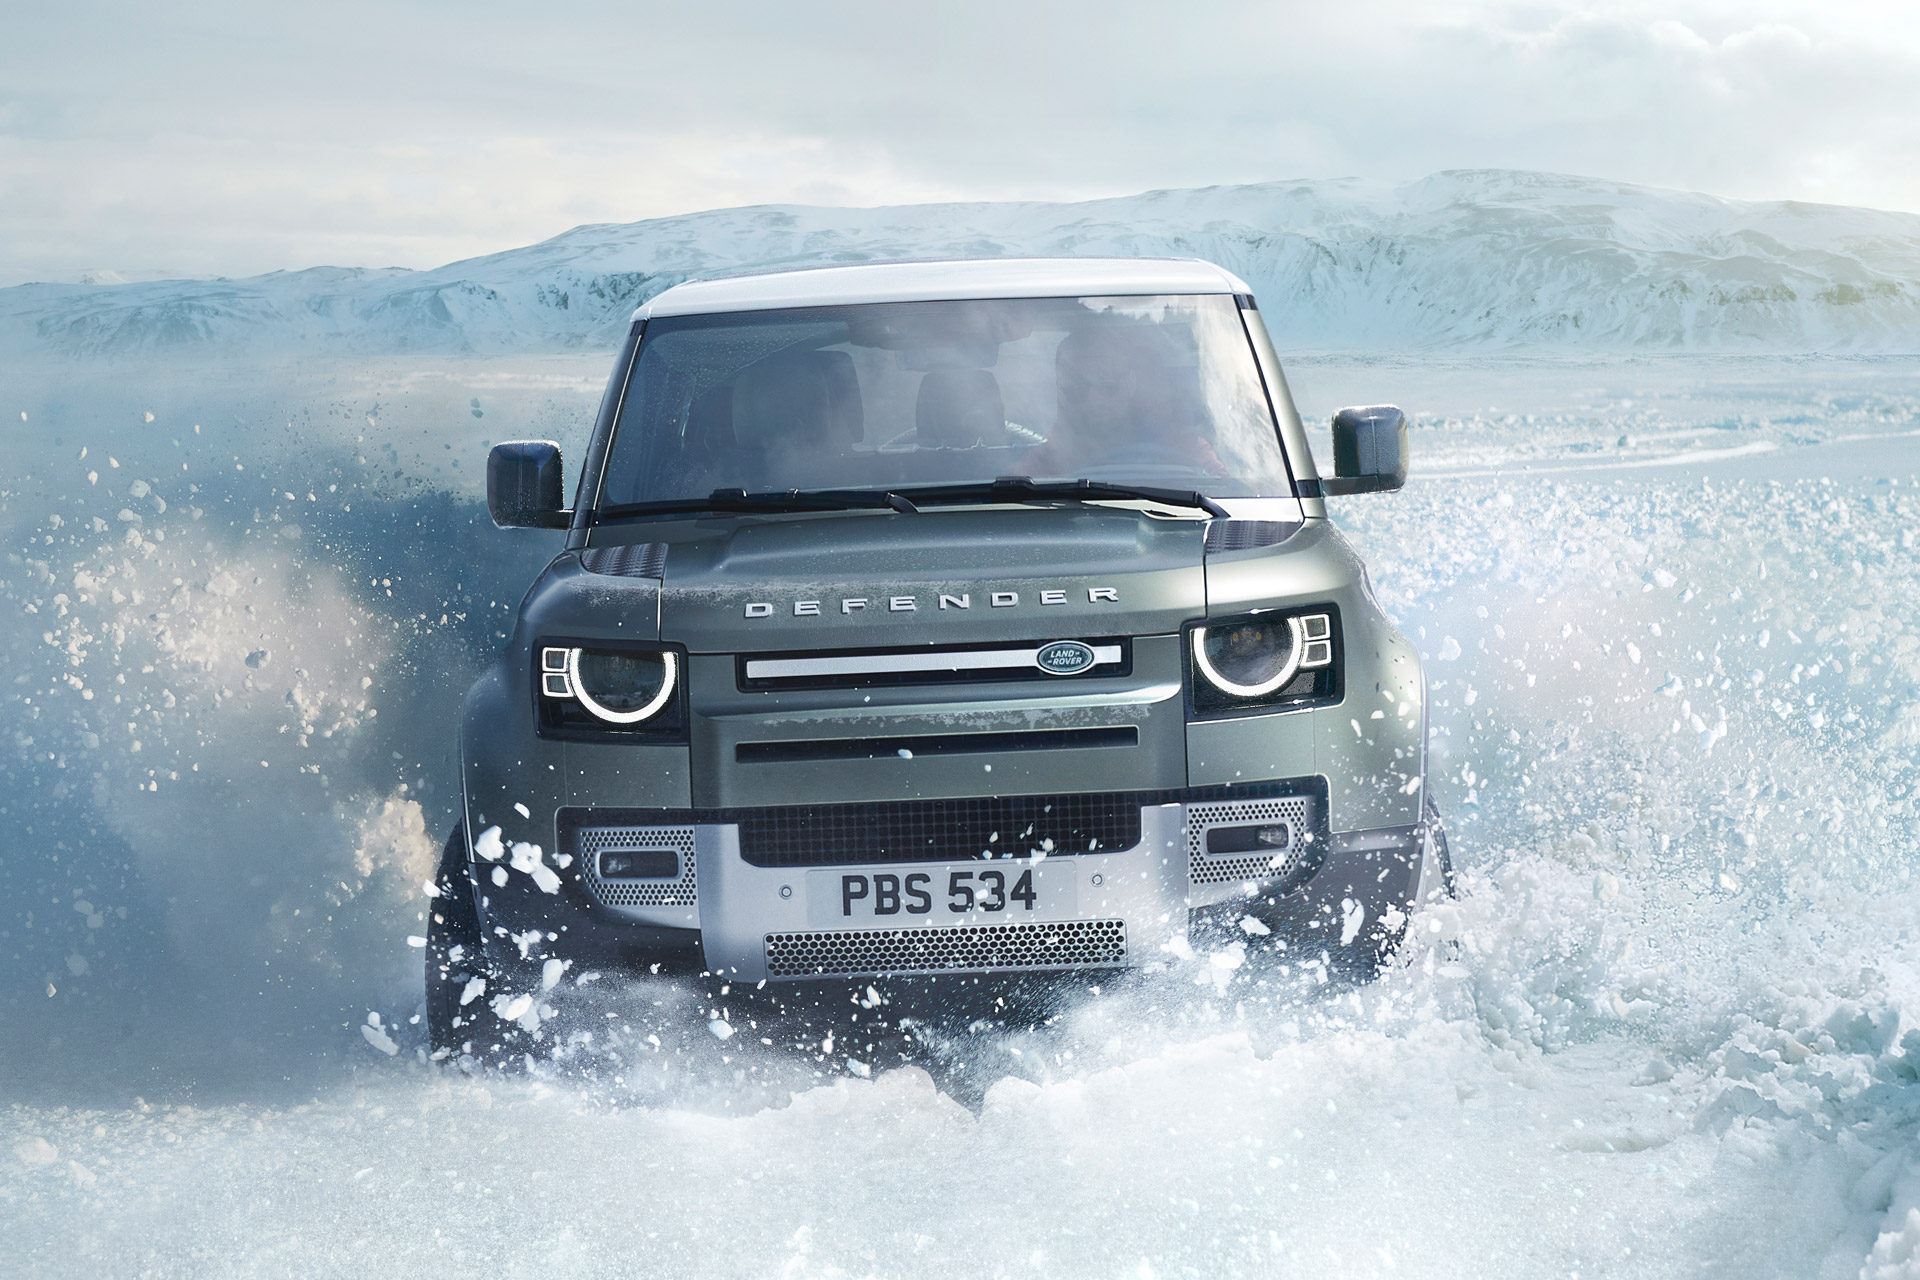 land rover defender in snow